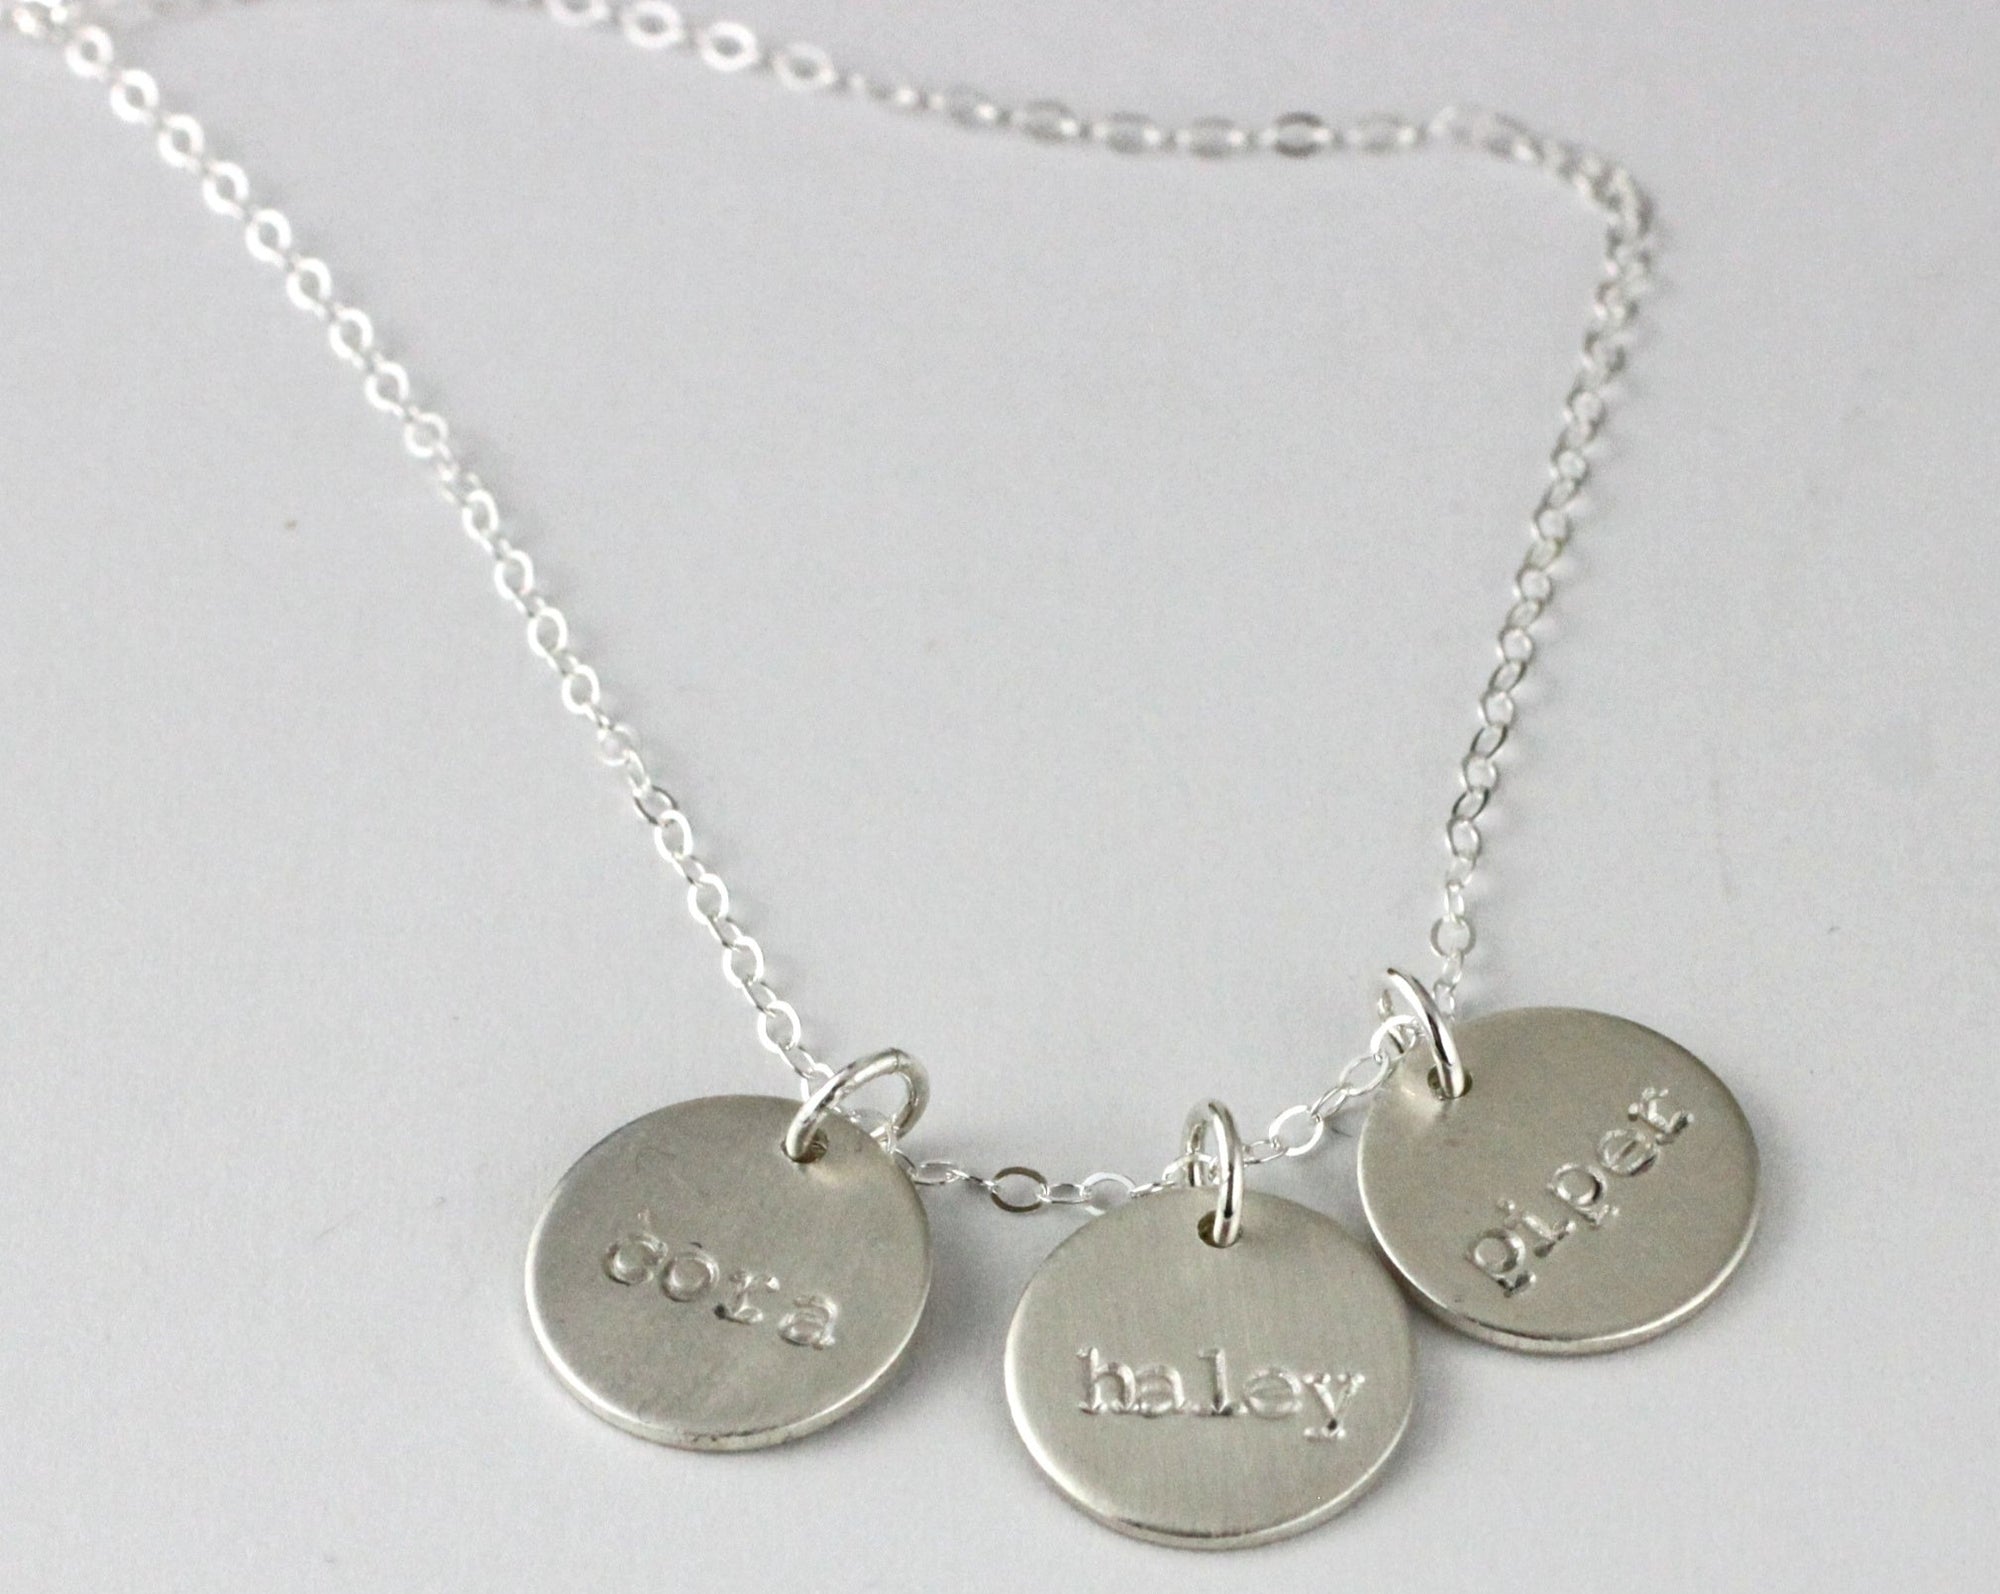 Personalized Mother's name necklace ( 1/2